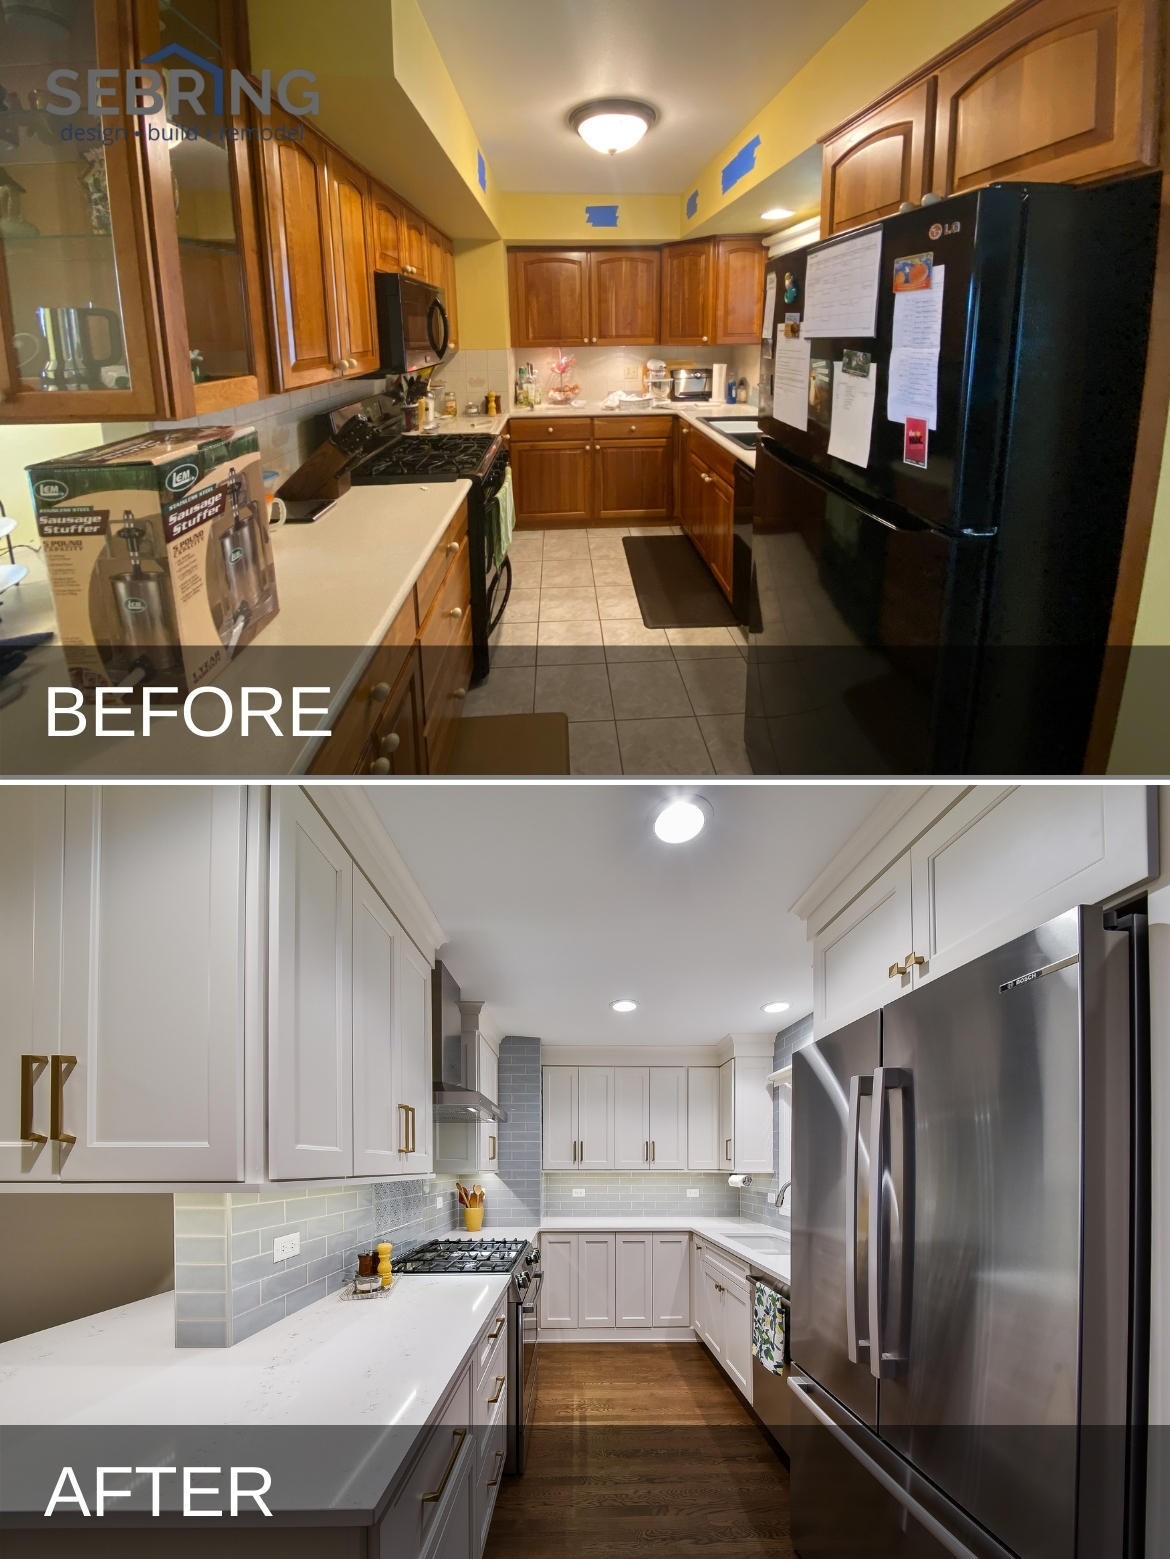 Kitchen Remodel Before & After